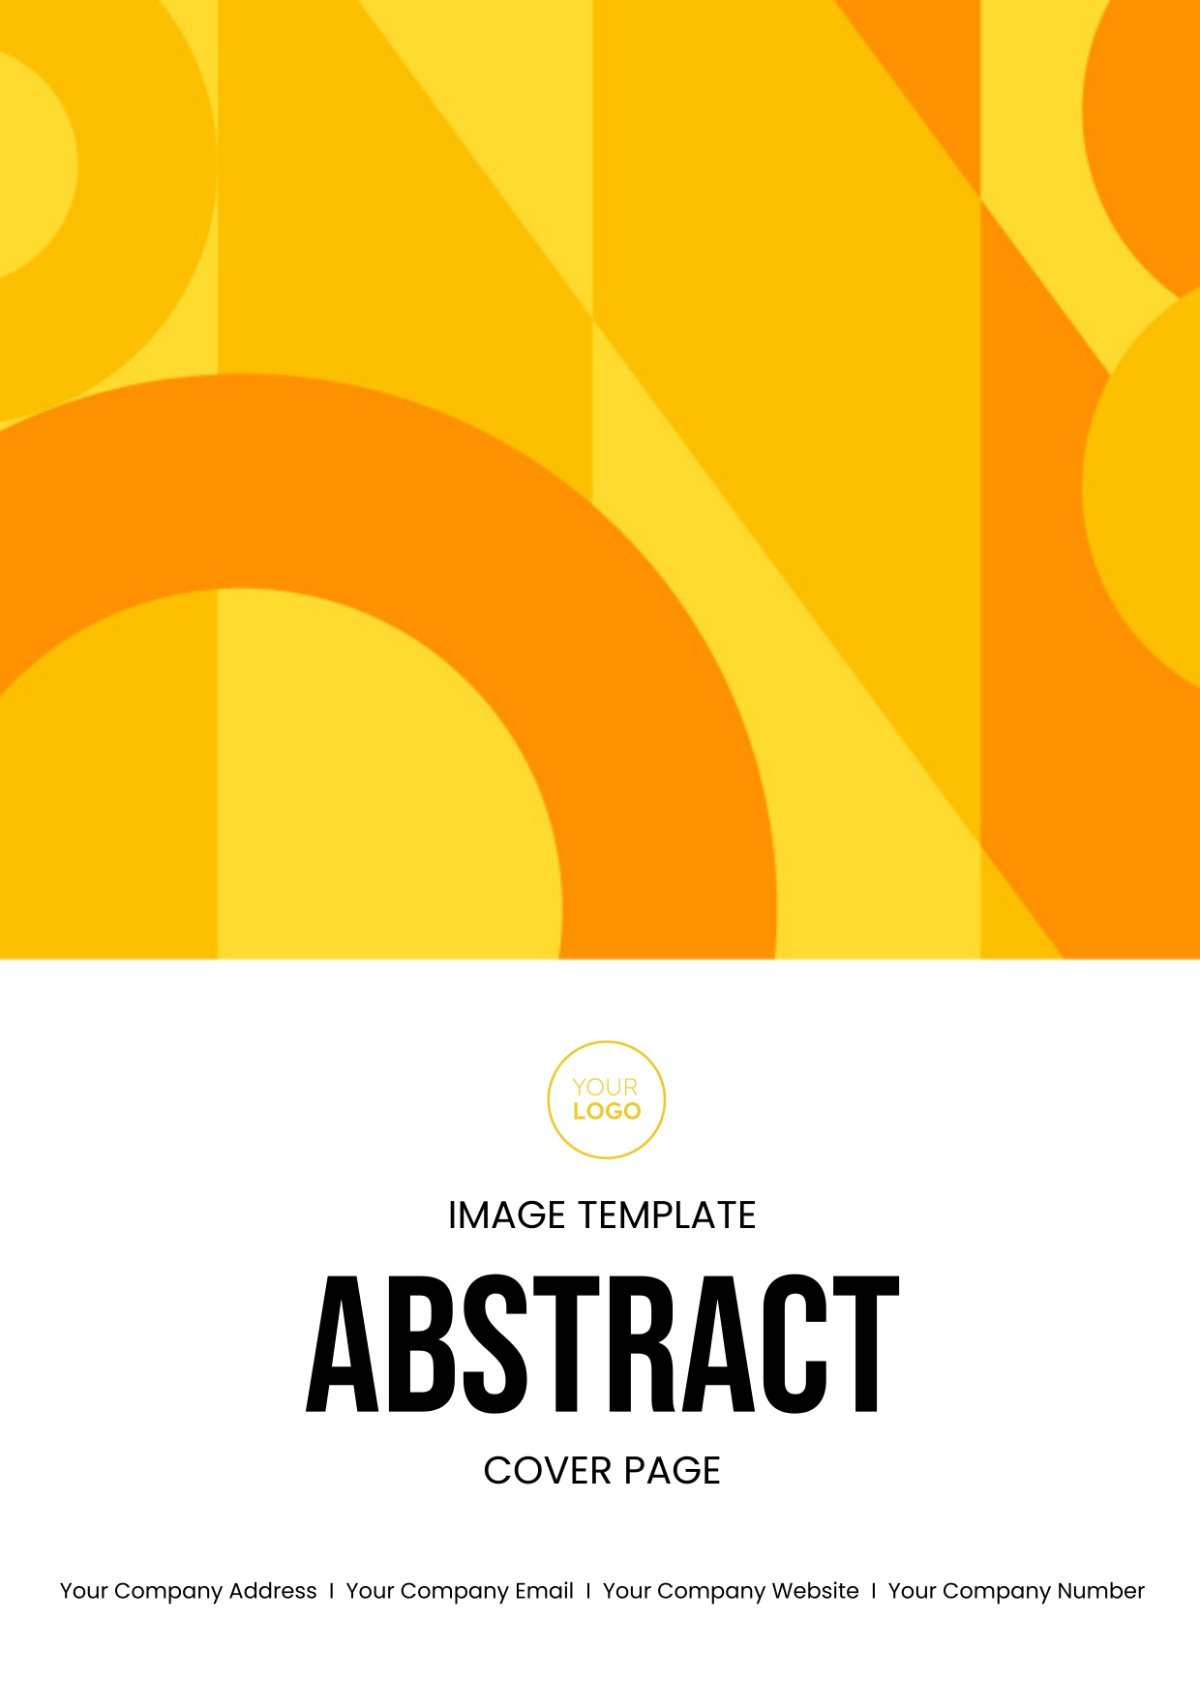 Abstract Cover Page Image